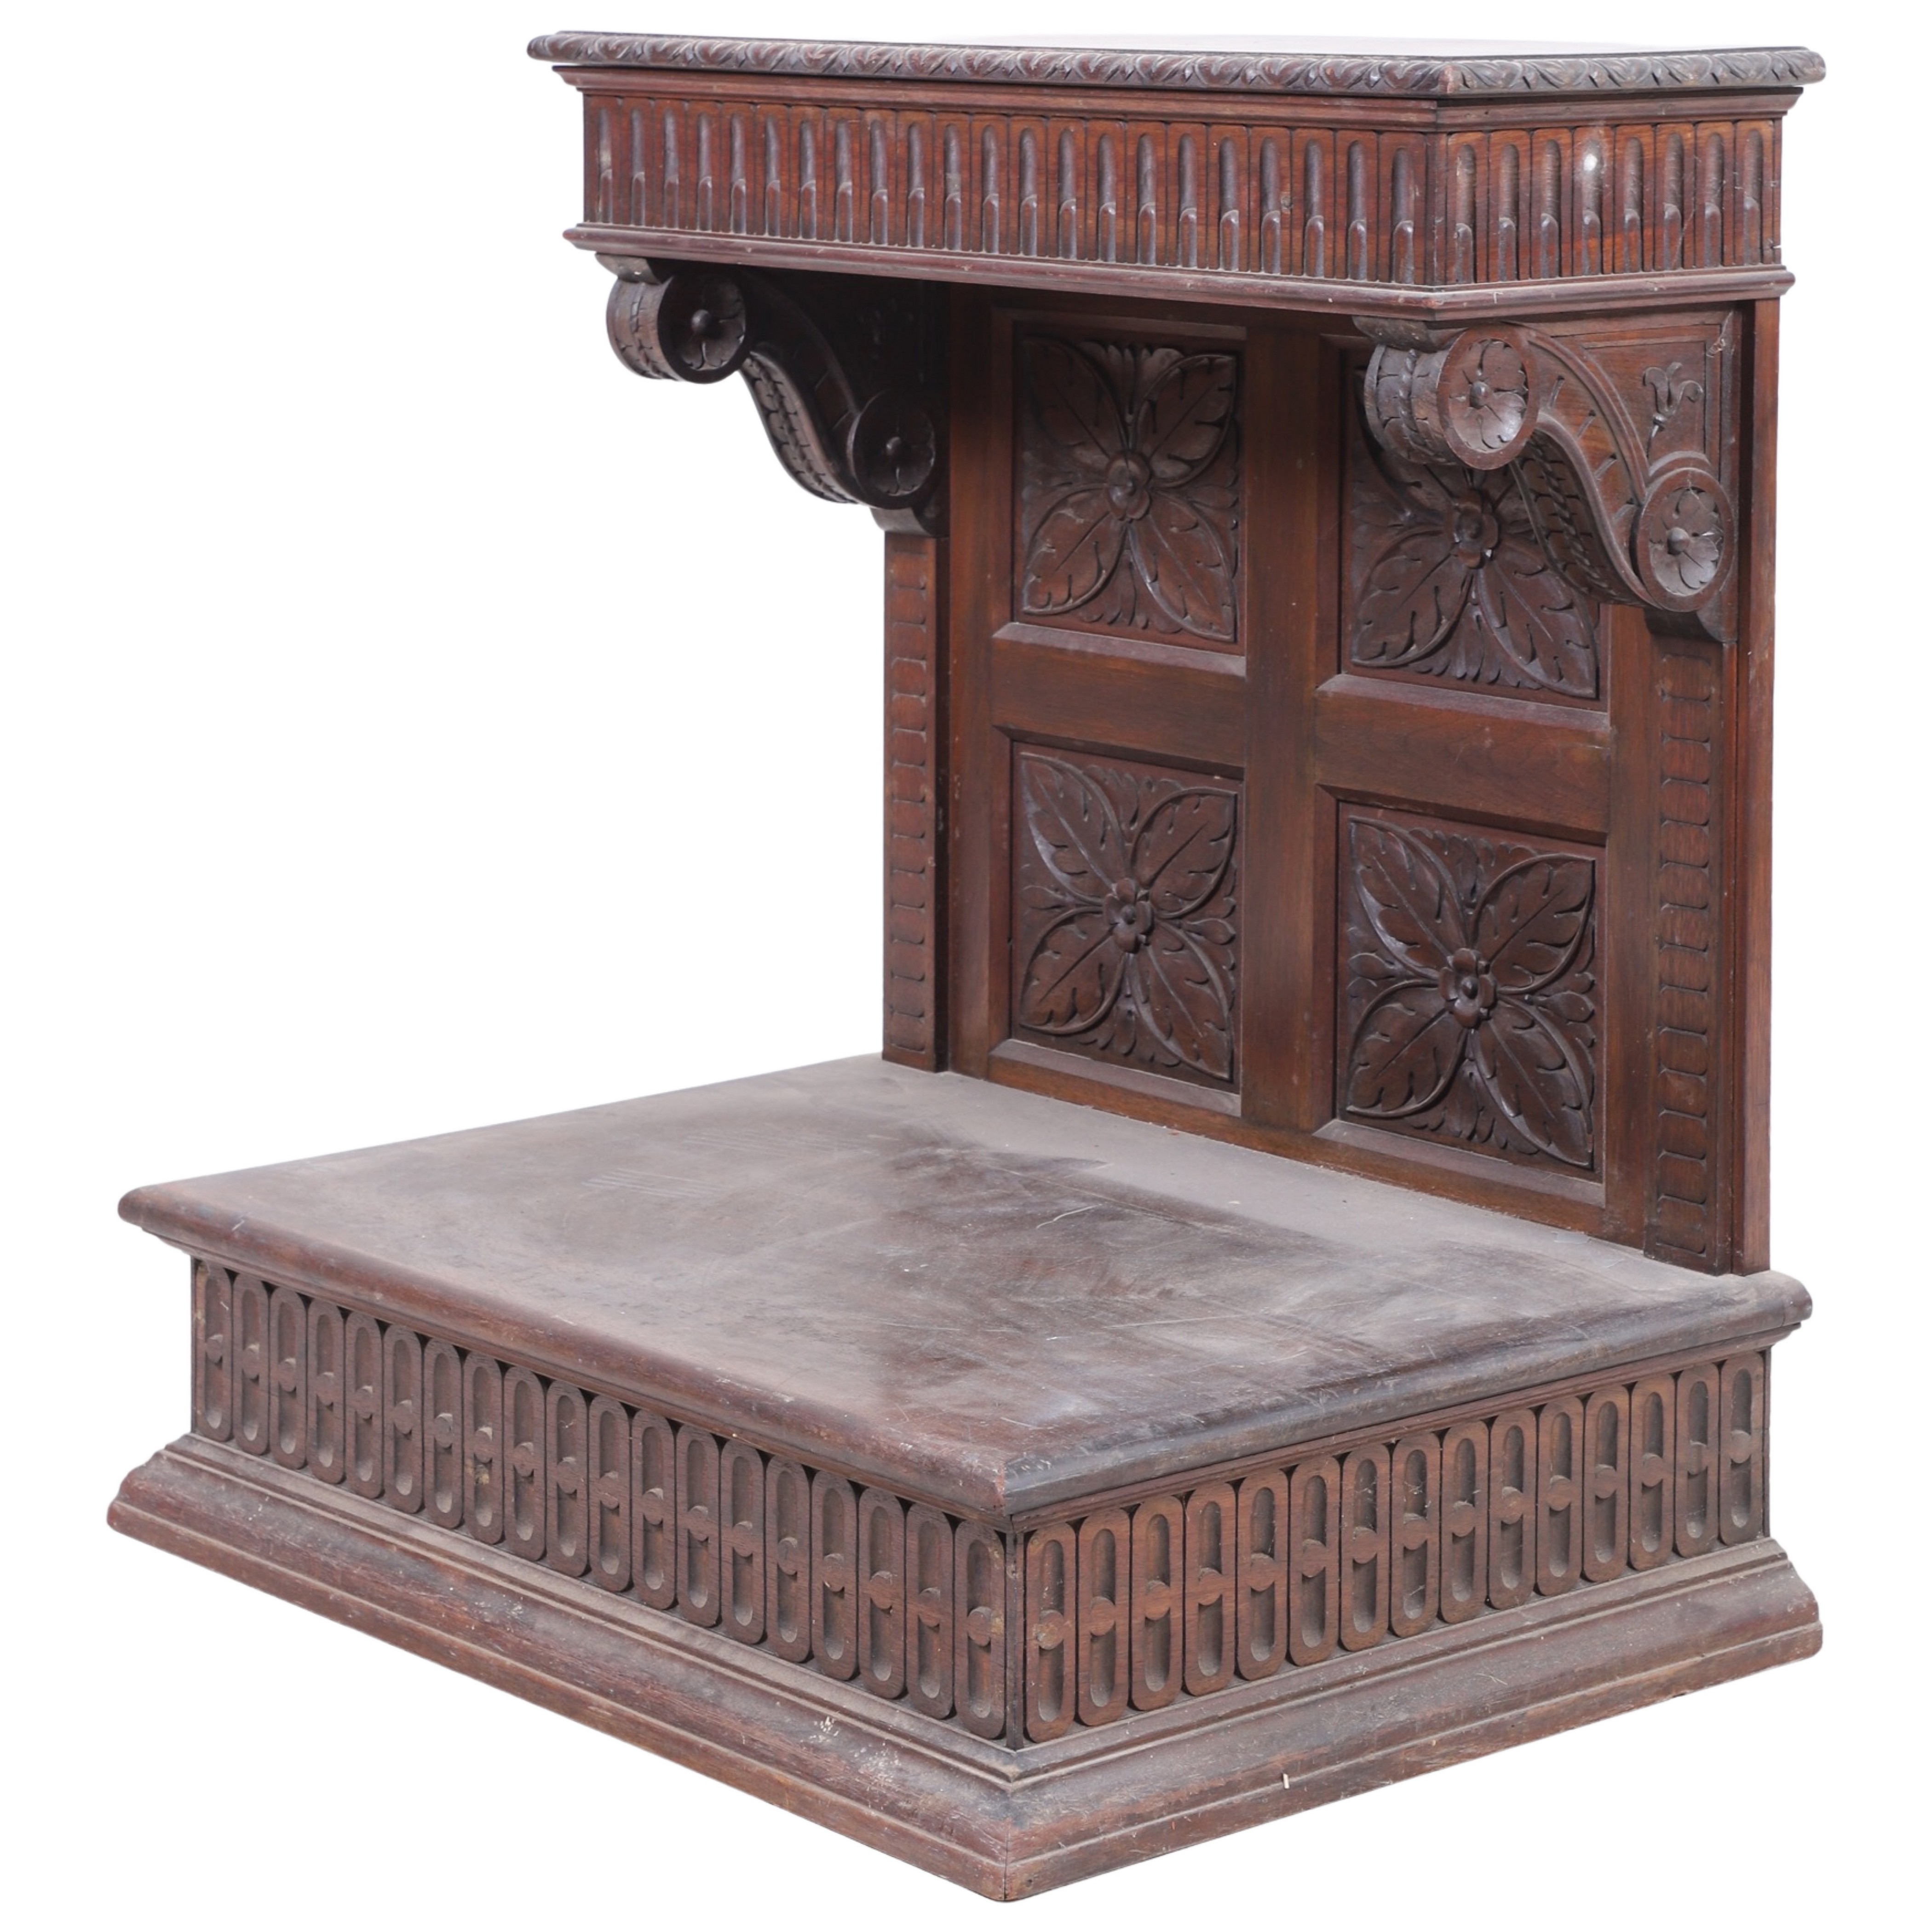 Carved mahogany pulpit, gadrooned